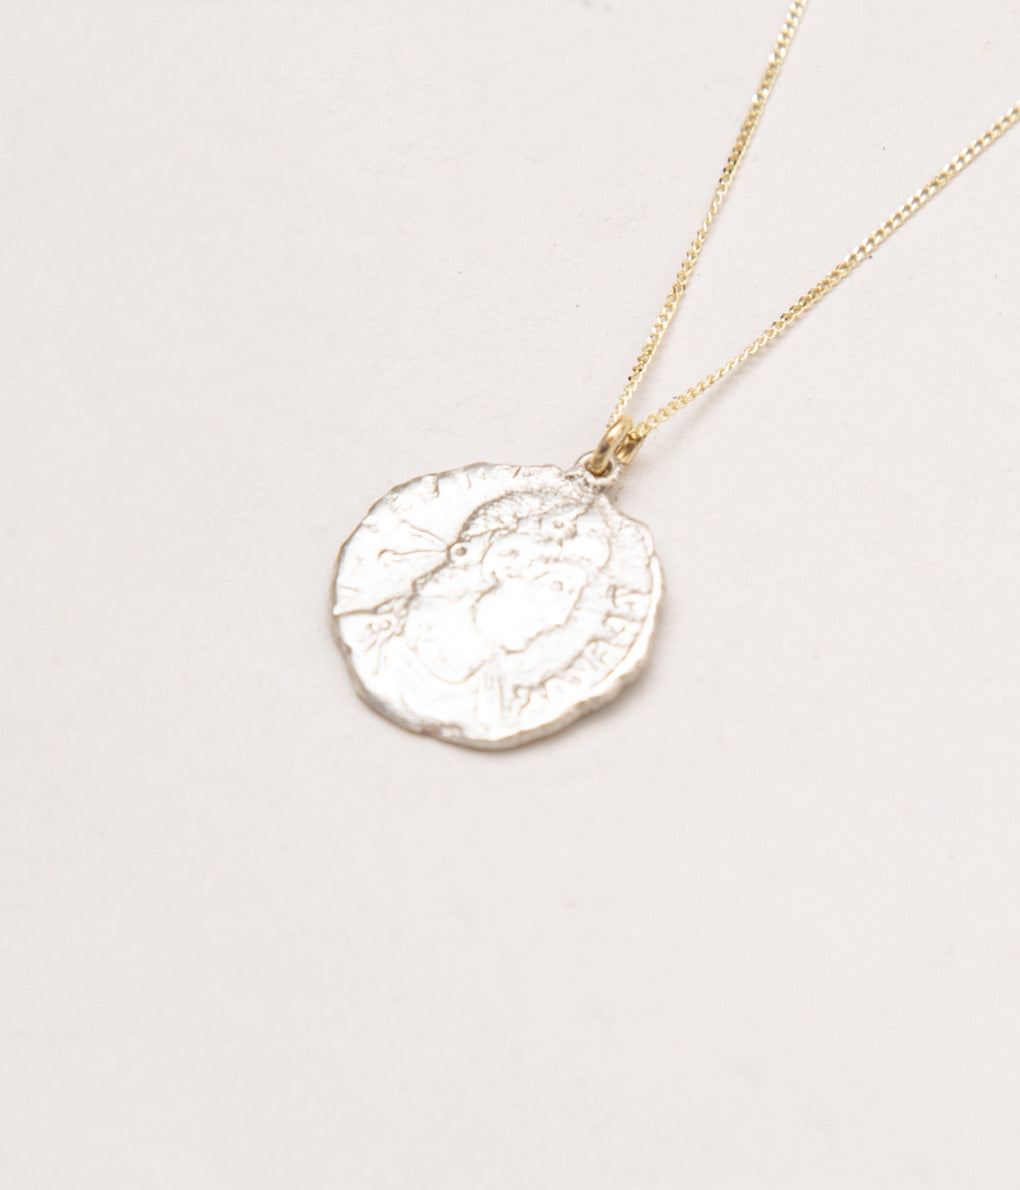 ORNAMENT&amp;CRIME "ROMAN COIN NEW SERIES NECKLACES SILVER WITH 9K GOLD"(SILVER WITH 9K GOLD)